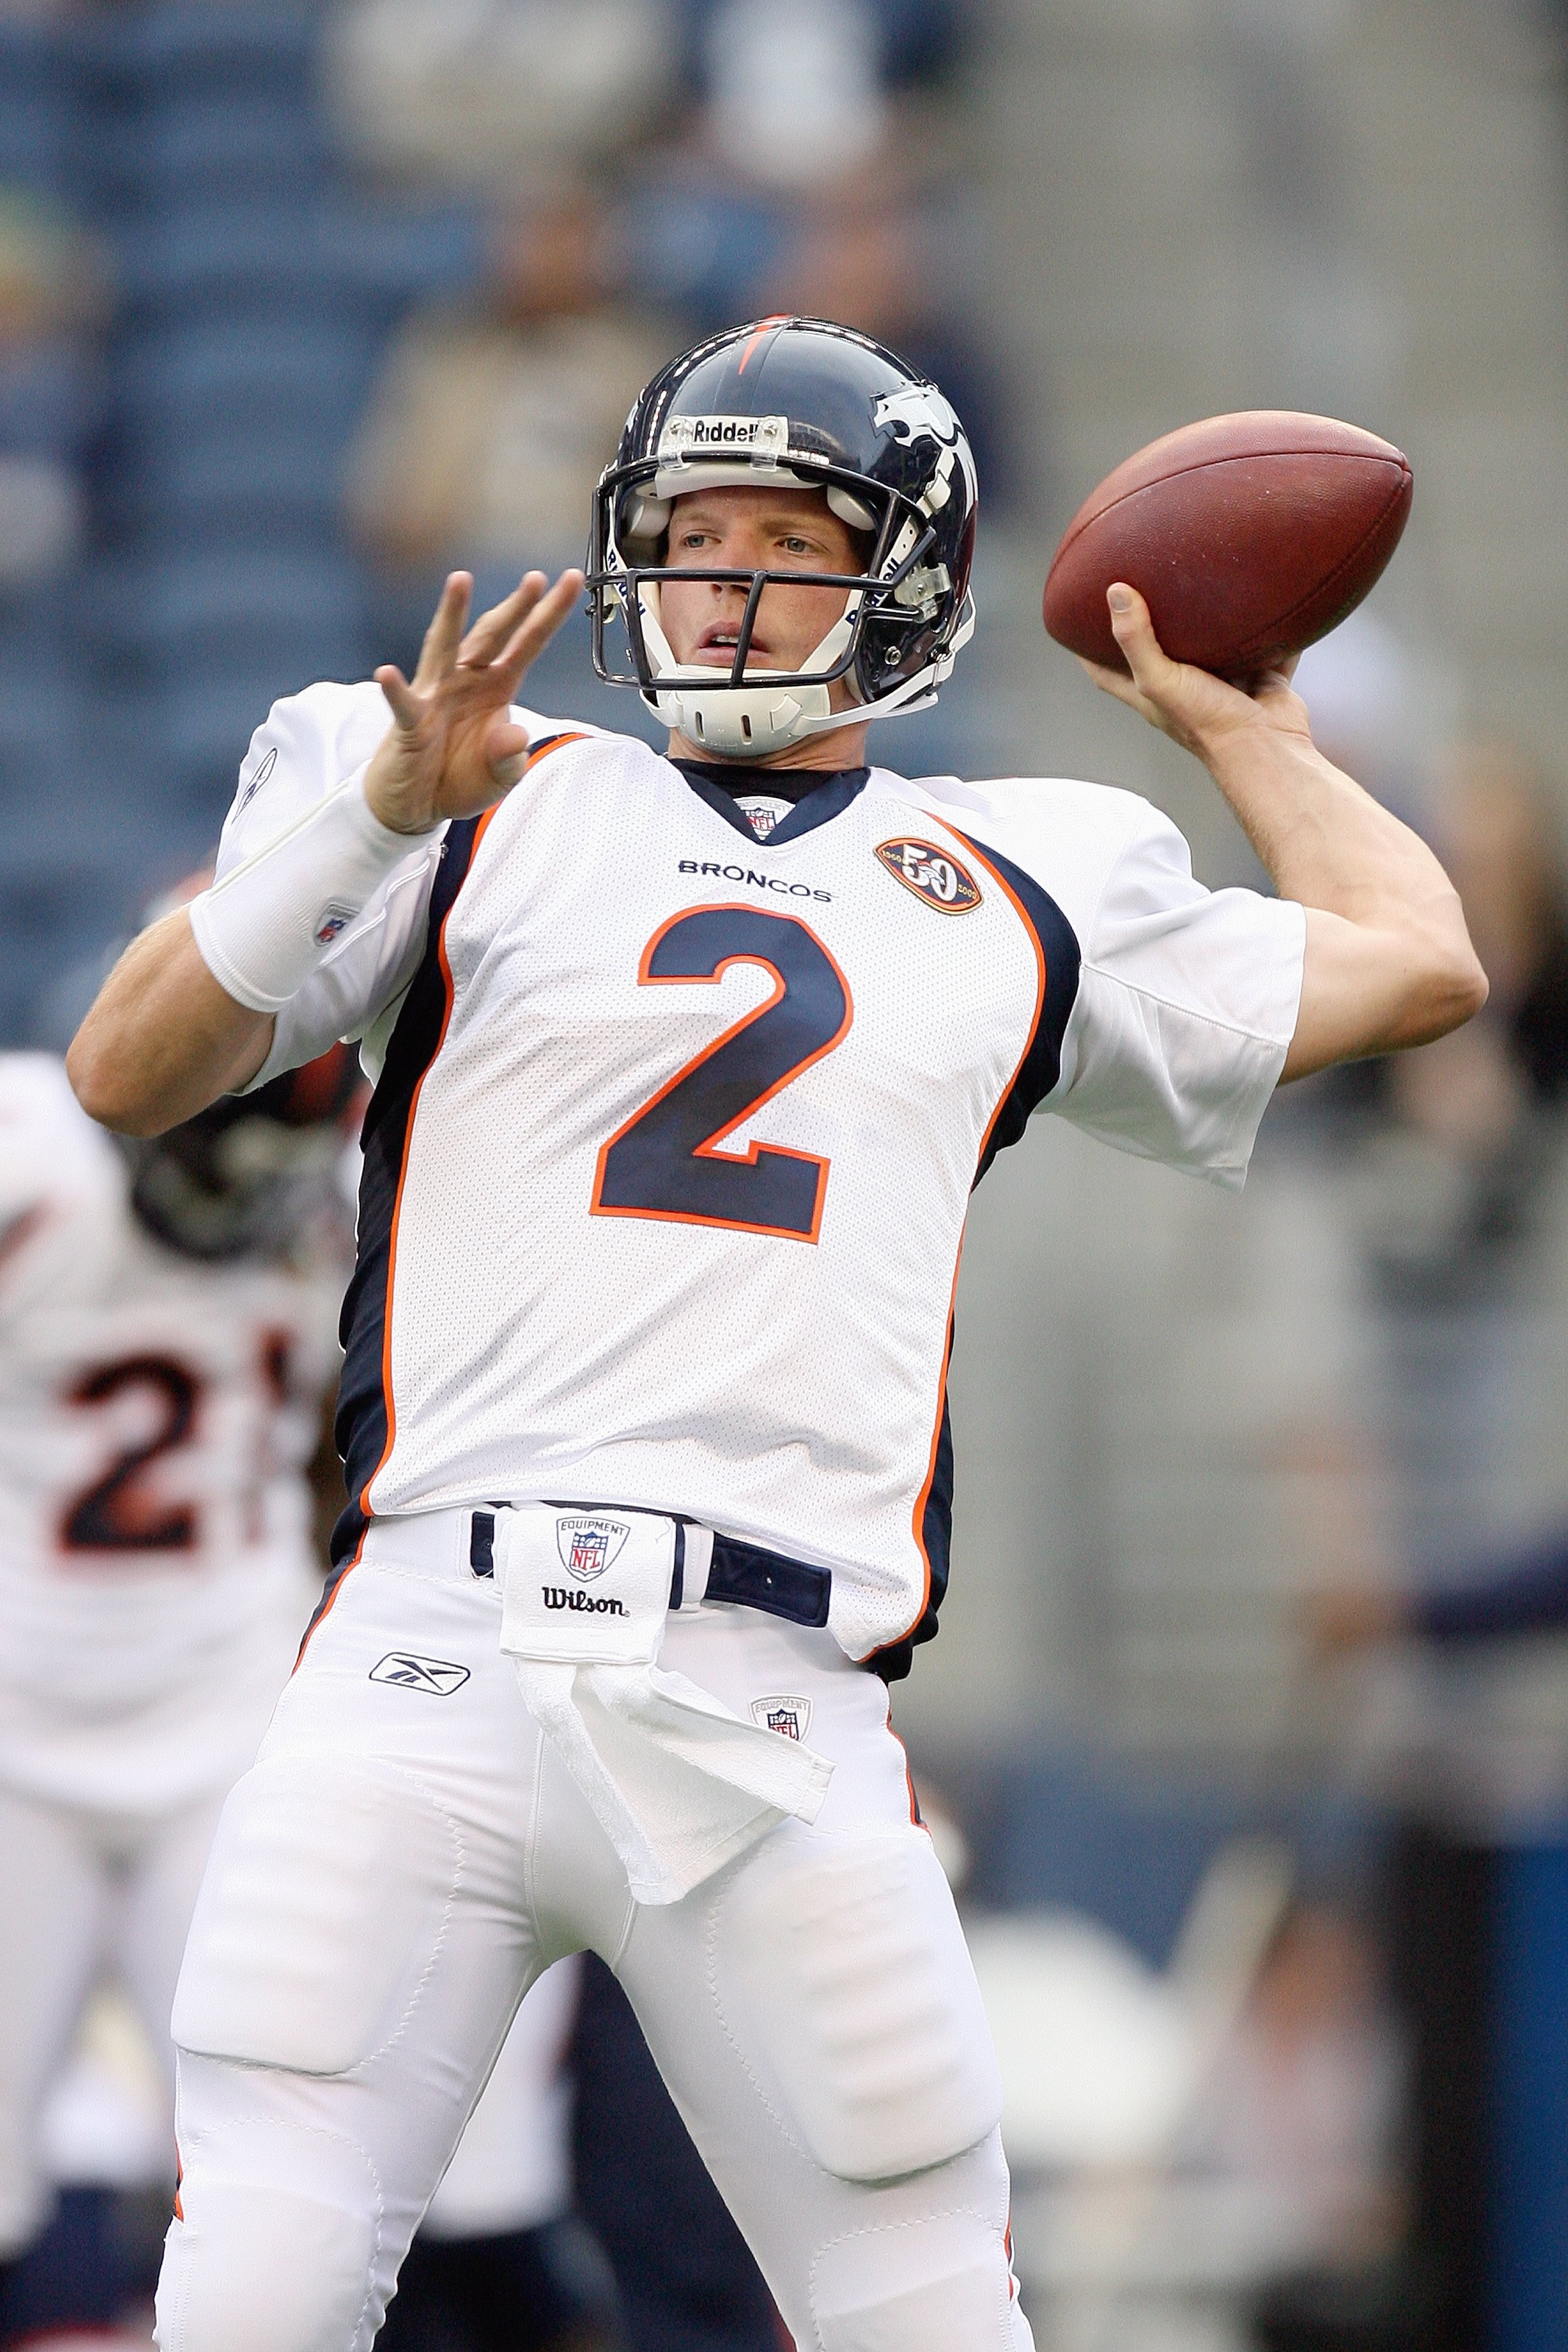 SEATTLE - AUGUST 22:  Quarterback Chris Simms #2 of the Denver Broncos warms up before the game against the Seattle Seahawks on August 22, 2009 at Qwest Field in Seattle, Washington. (Photo by Otto Greule Jr/Getty Images)